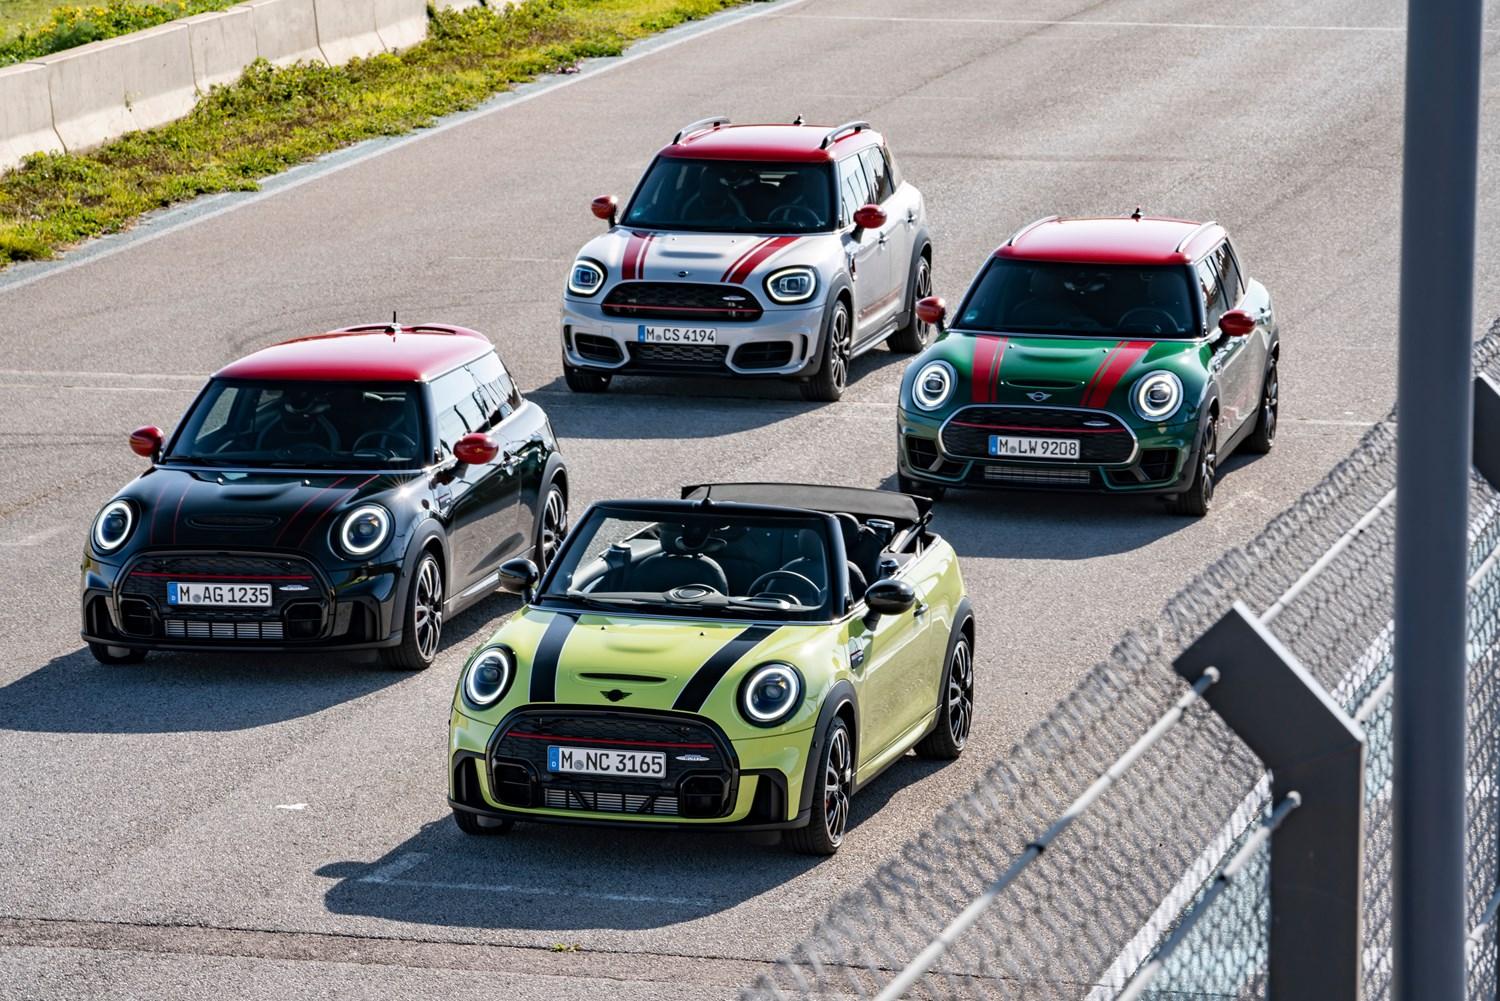 The new MINI John Cooper Works range in different colours, at the starting line of a racetrack